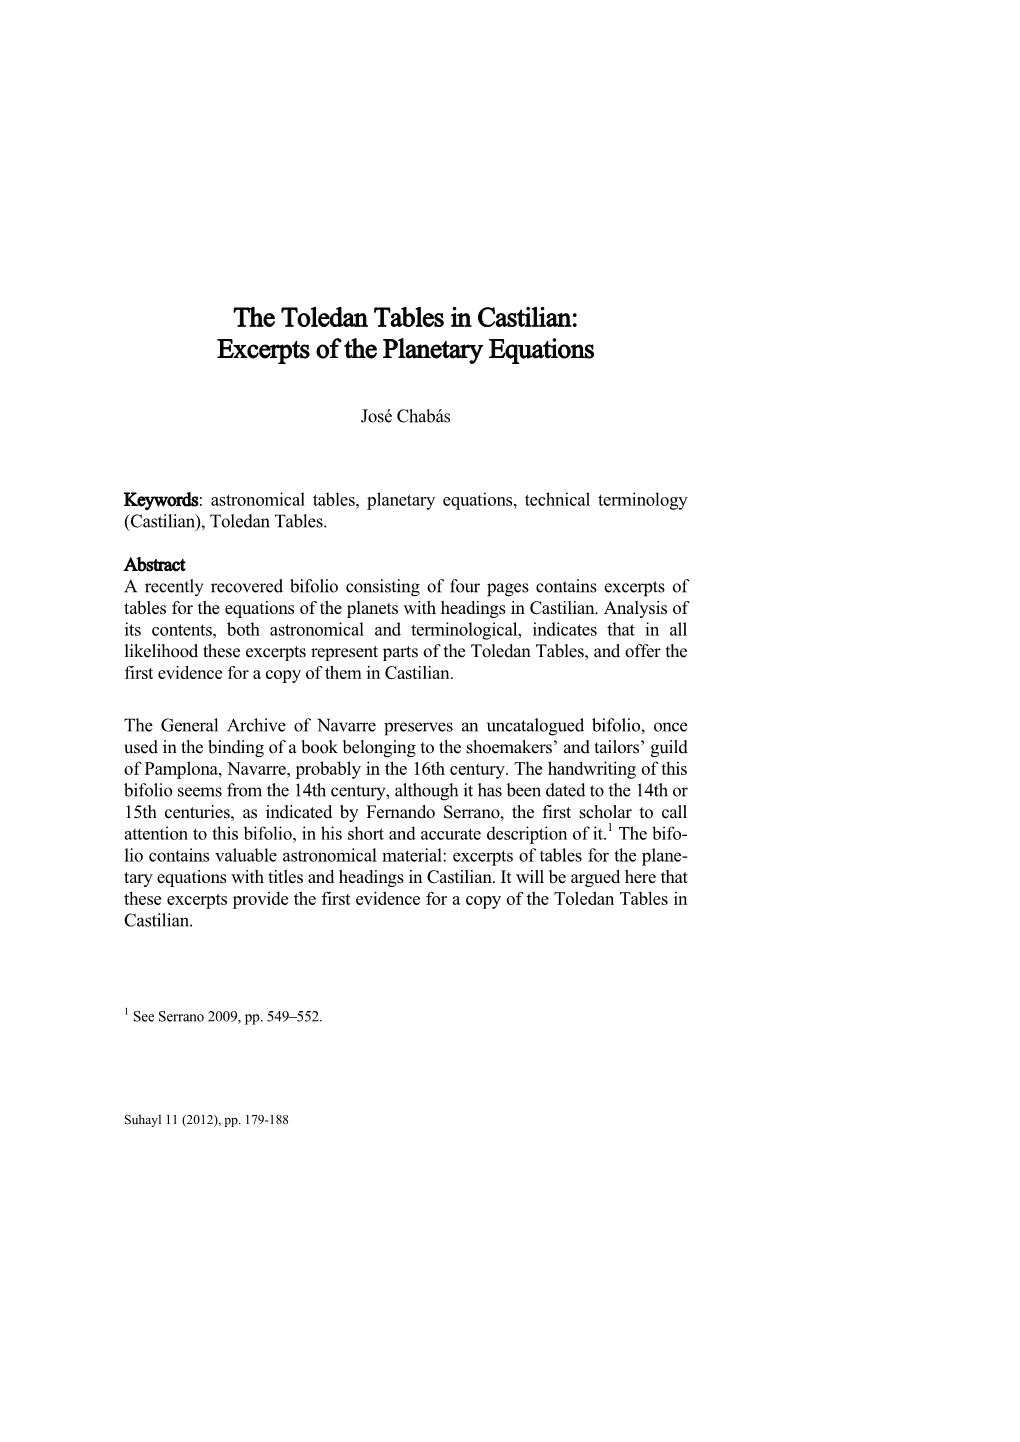 The Toledan Tables in Castilian: Excerpts of the Planetary Equations